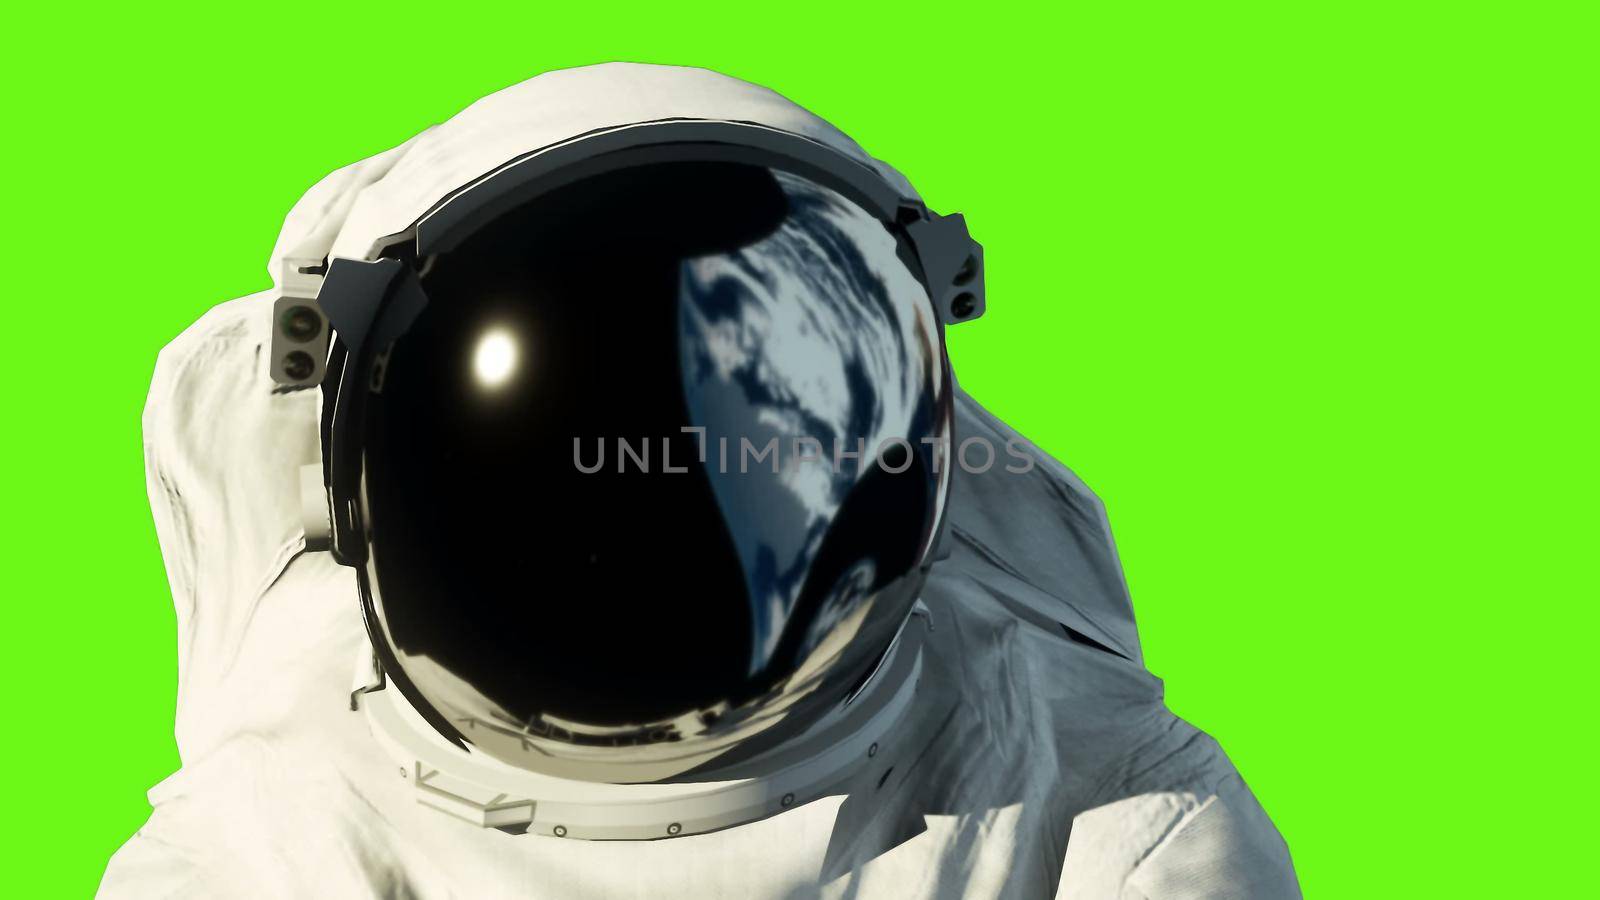 An astronaut on the moon next to his moon rover watching the Earth. Green screen.. 3D rendering by designprojects